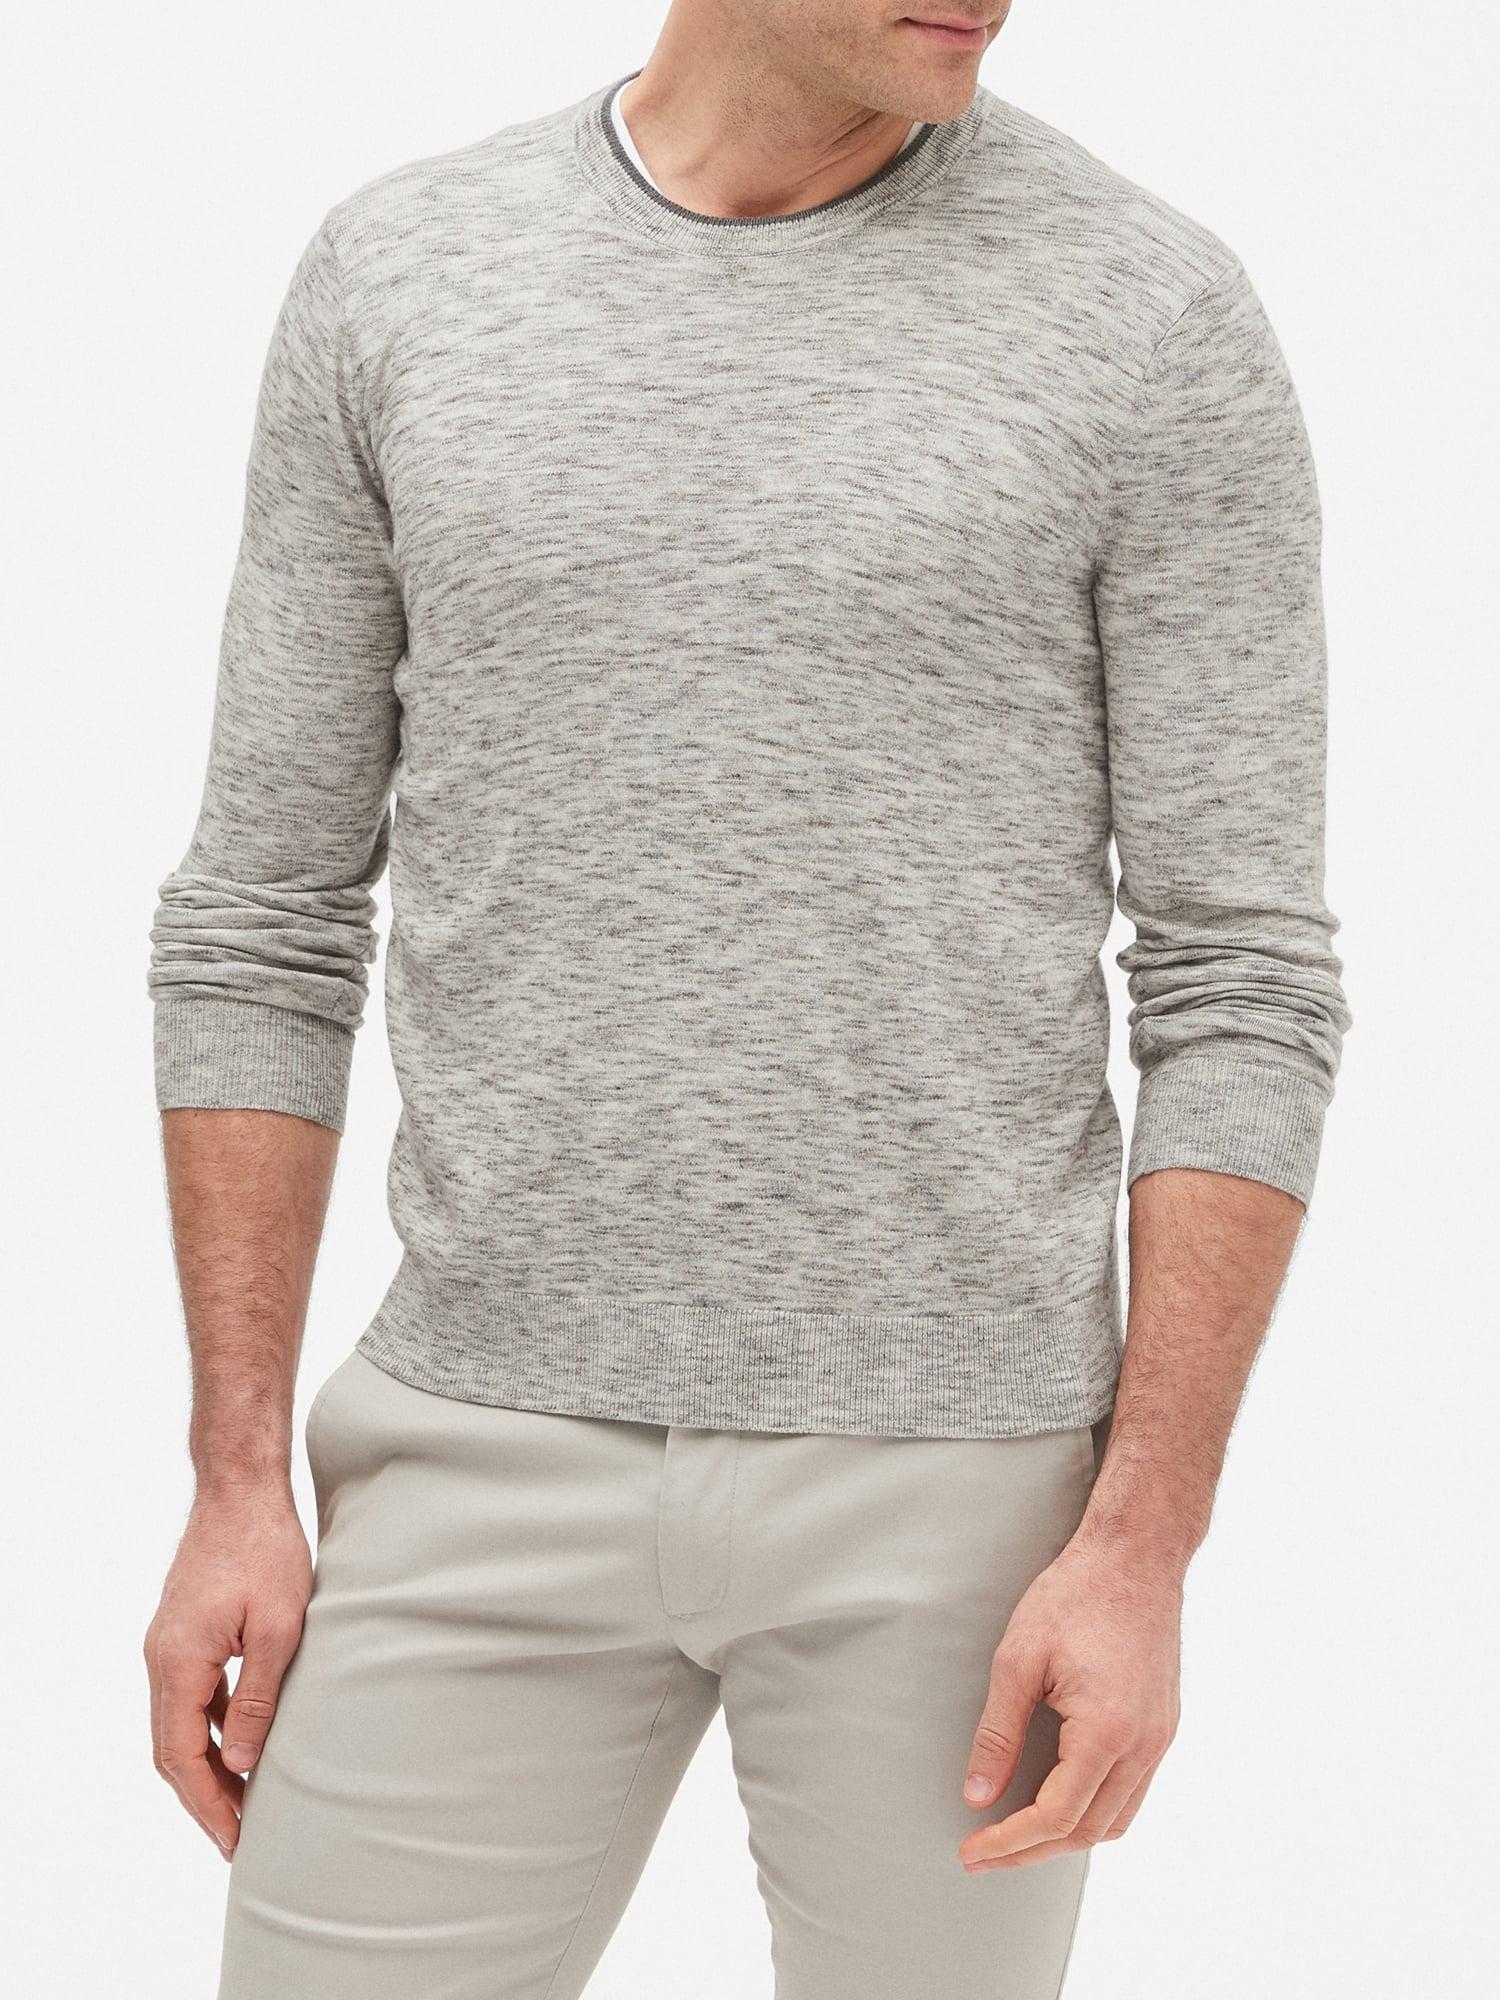 Banana Republic Factory Space-dyed Crew Neck Sweater in Gray for Men - Lyst